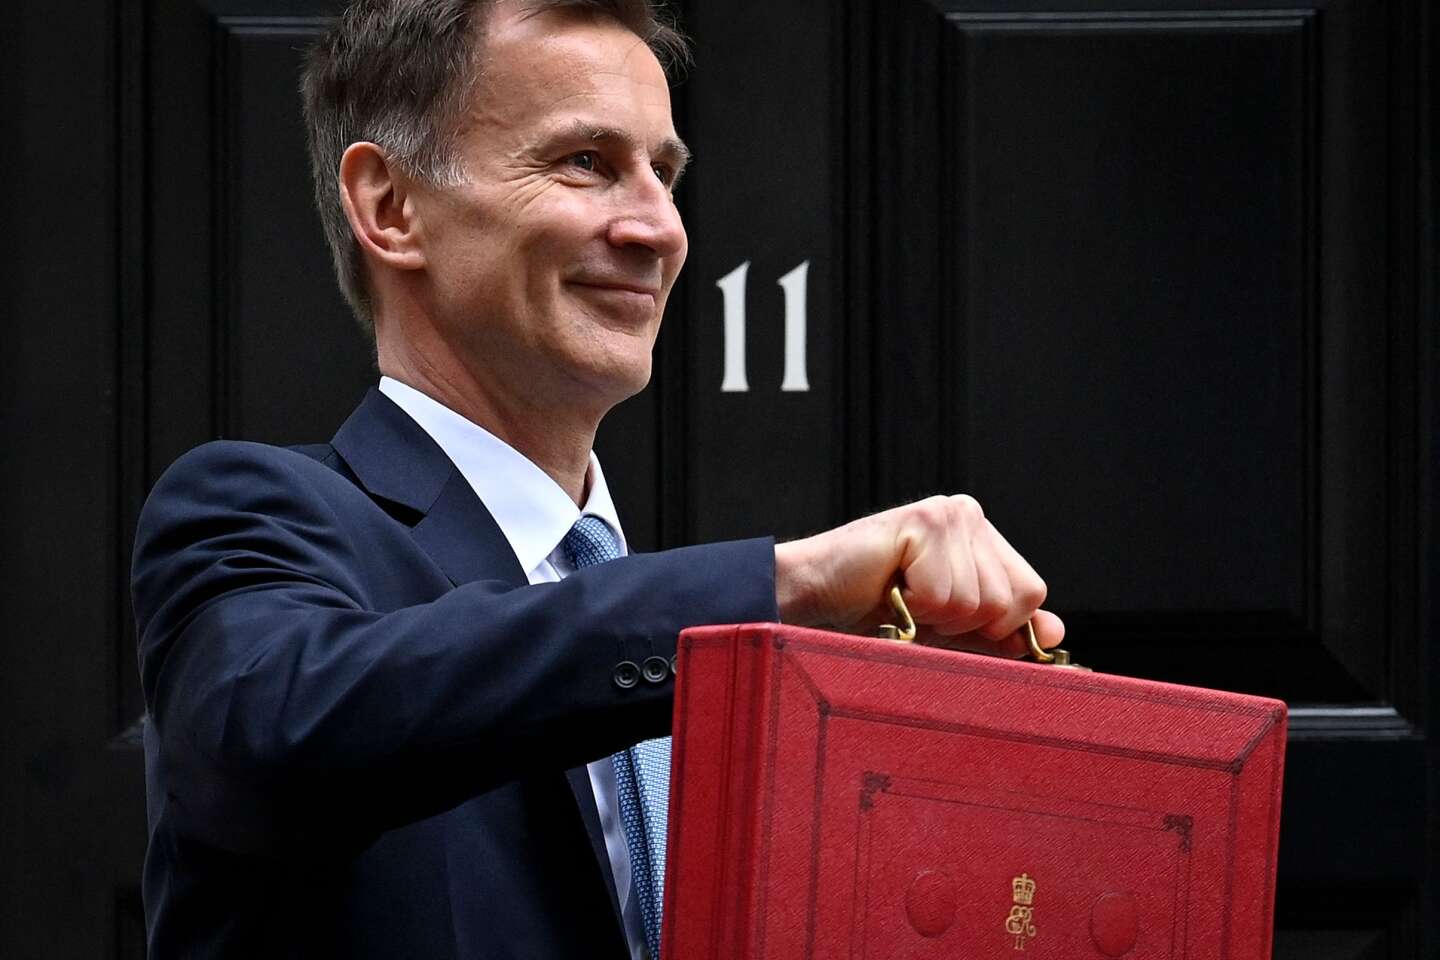 In the UK, a budget to put the British back to work